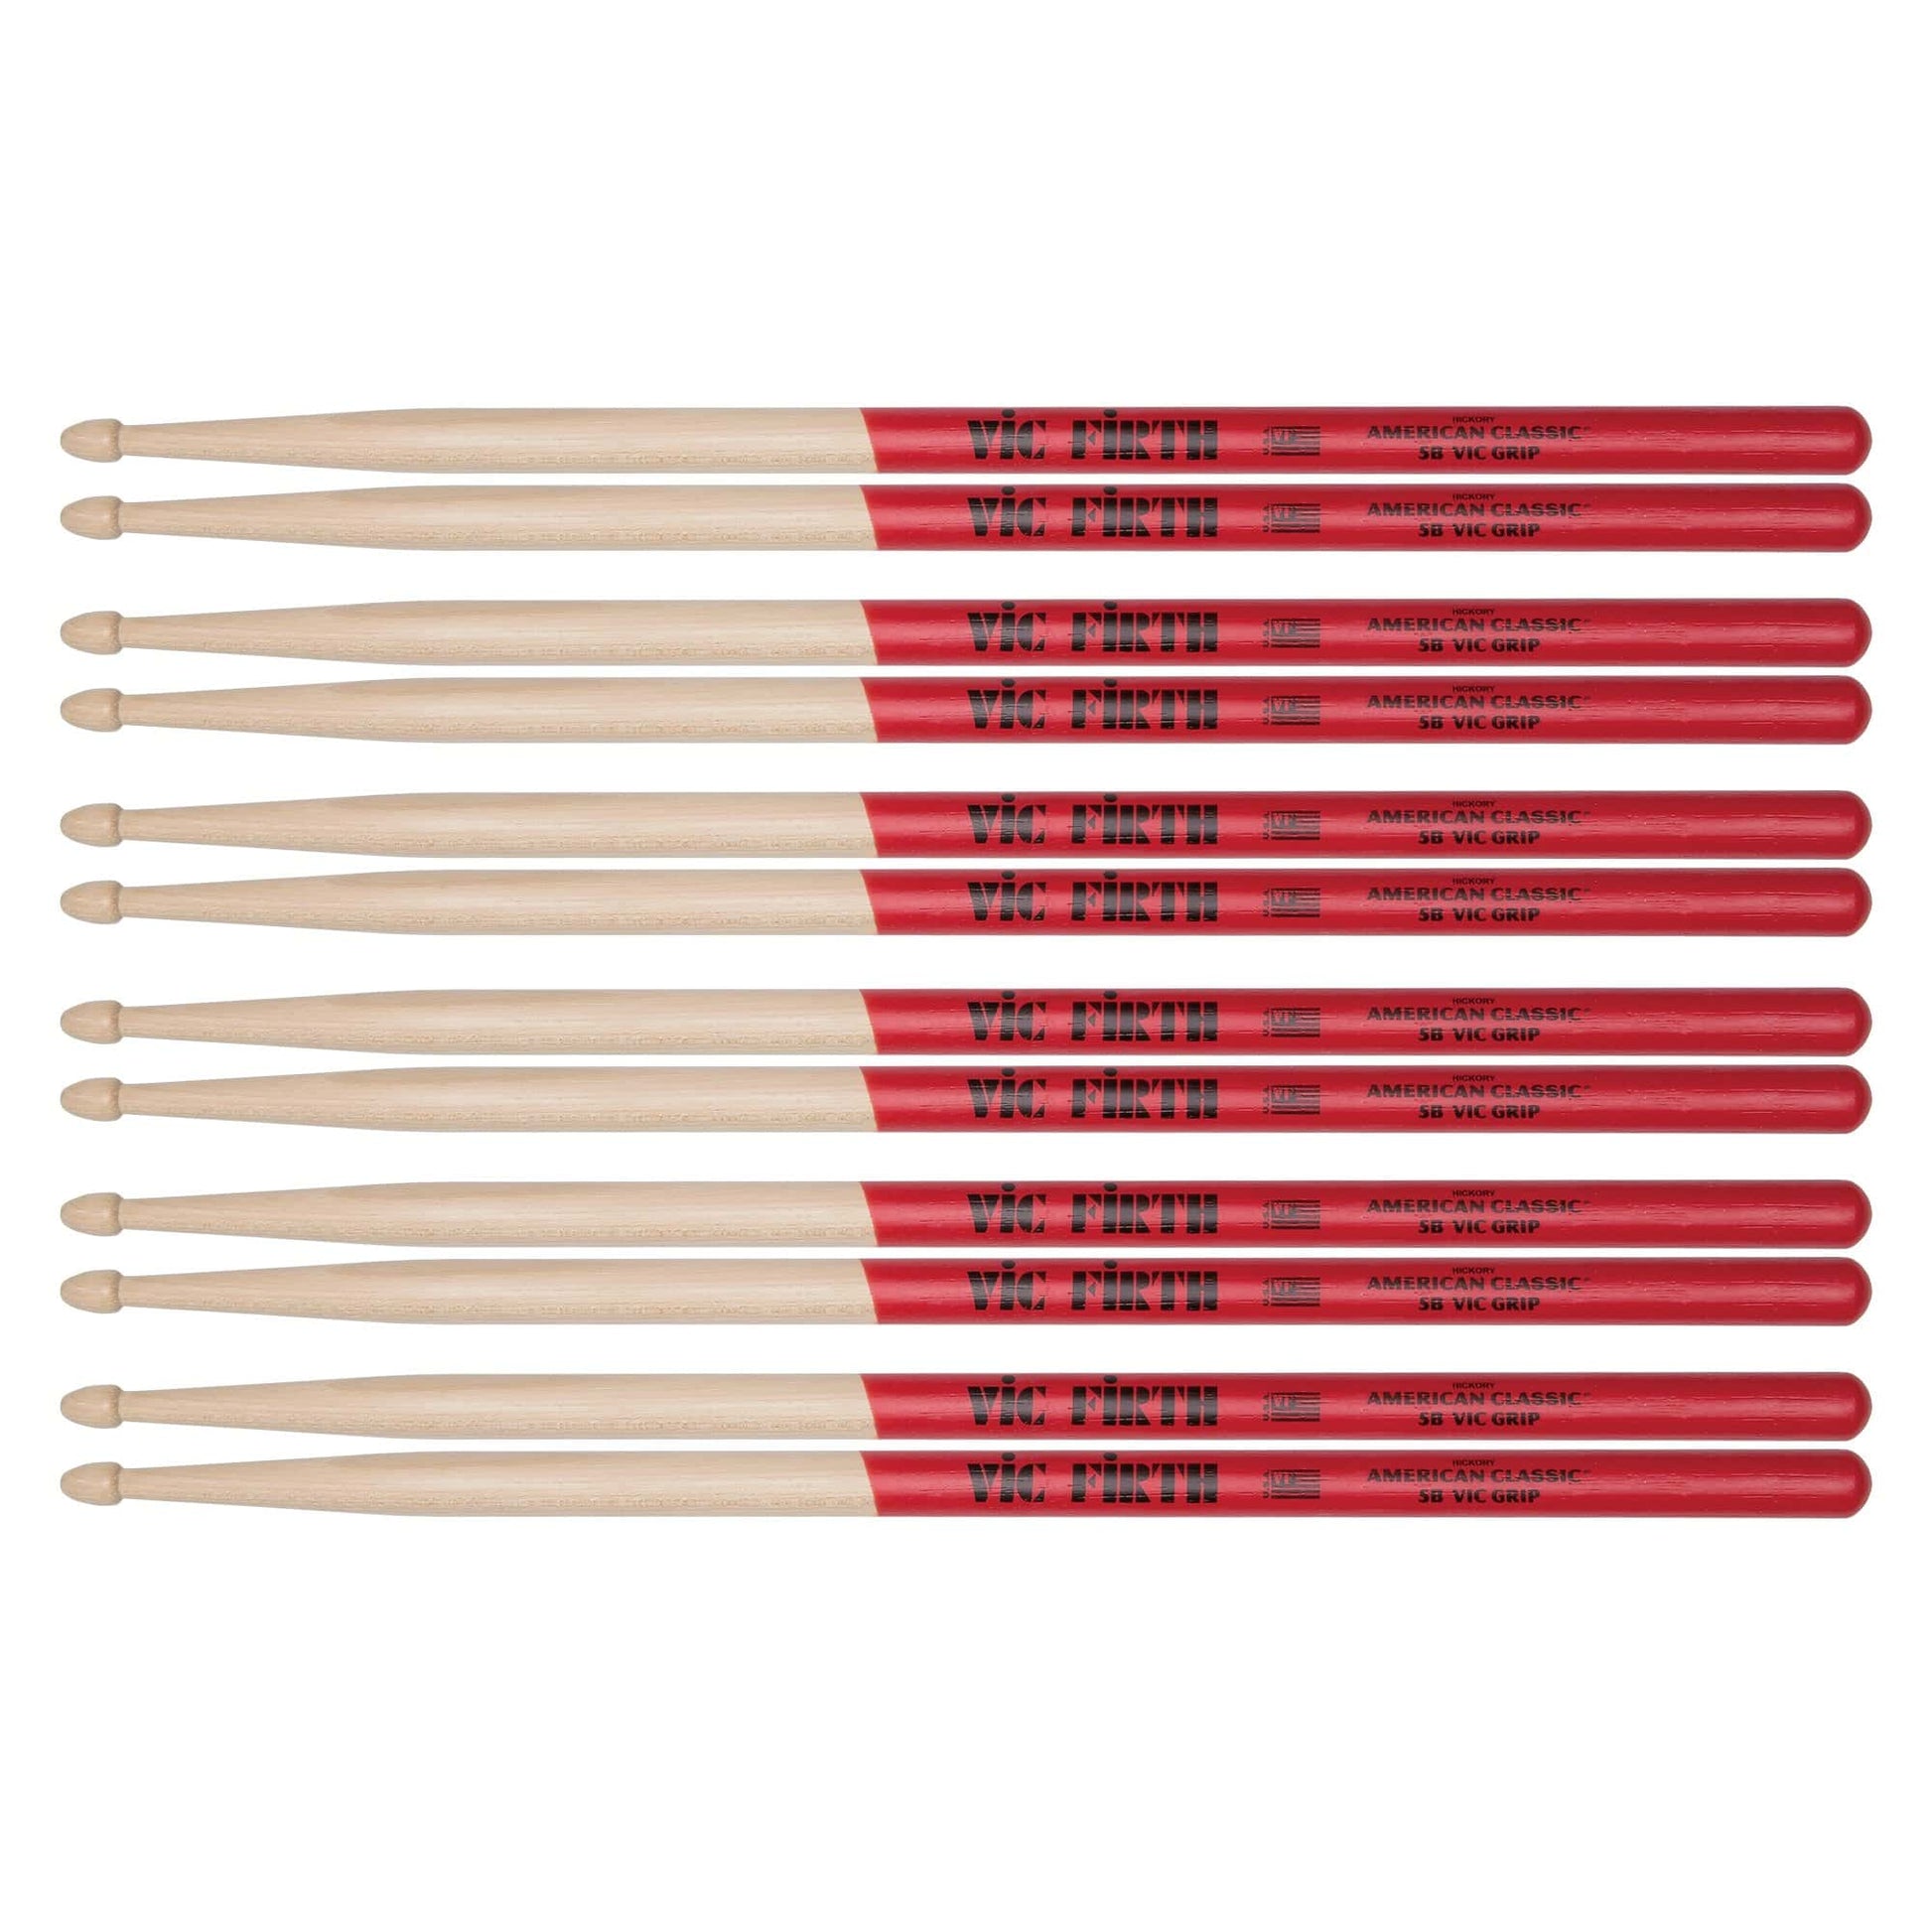 Vic Firth American Classic 5B Vic Grip Wood Tip Drum Sticks (6 Pair Bundle) Drums and Percussion / Parts and Accessories / Drum Sticks and Mallets